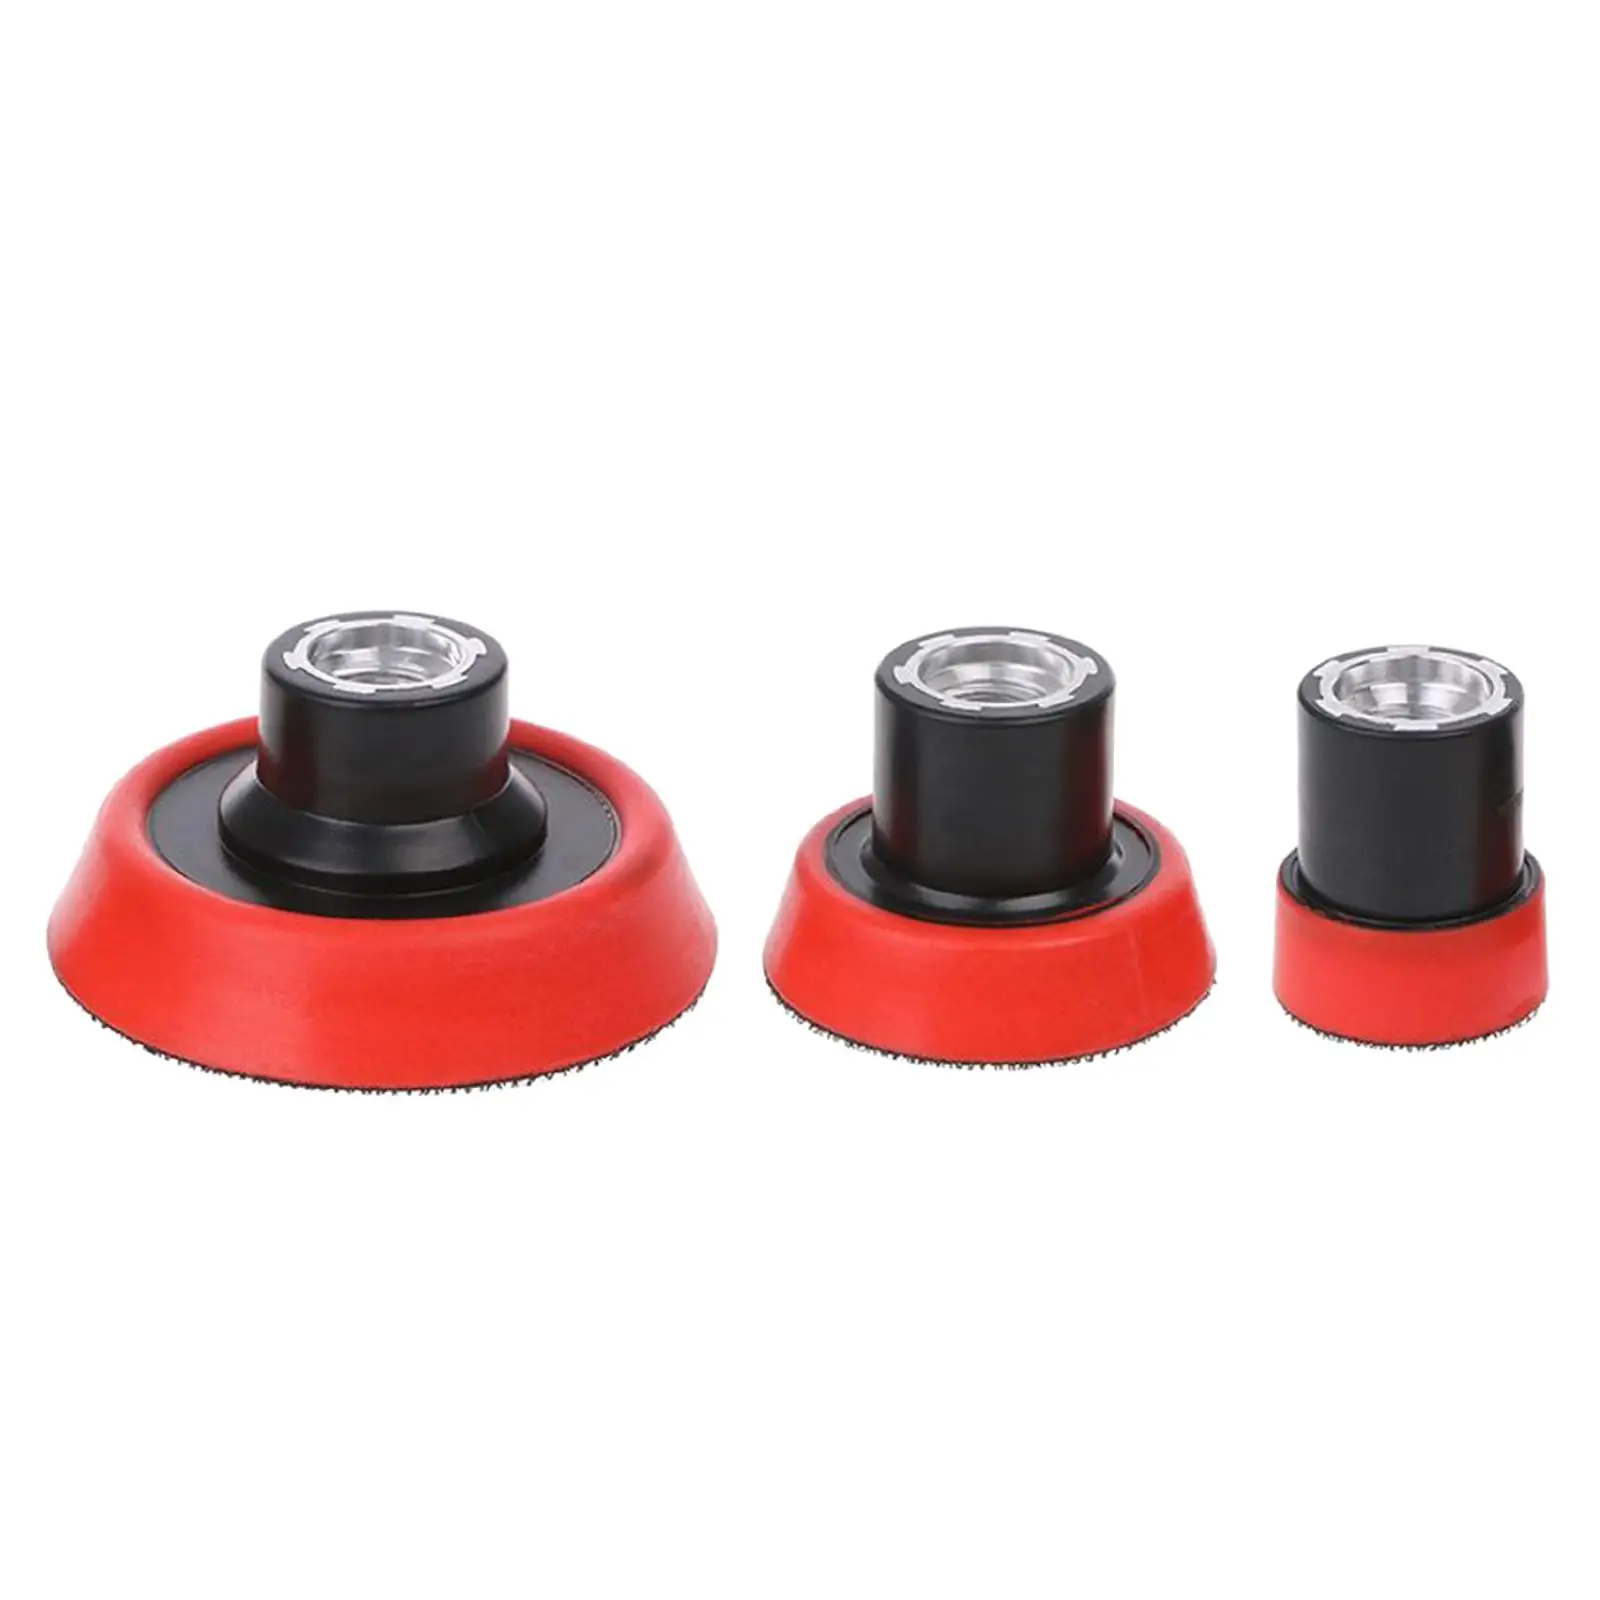 3x M14 Accessories Set Backer Polisher Backing   for Car Wash Detailing